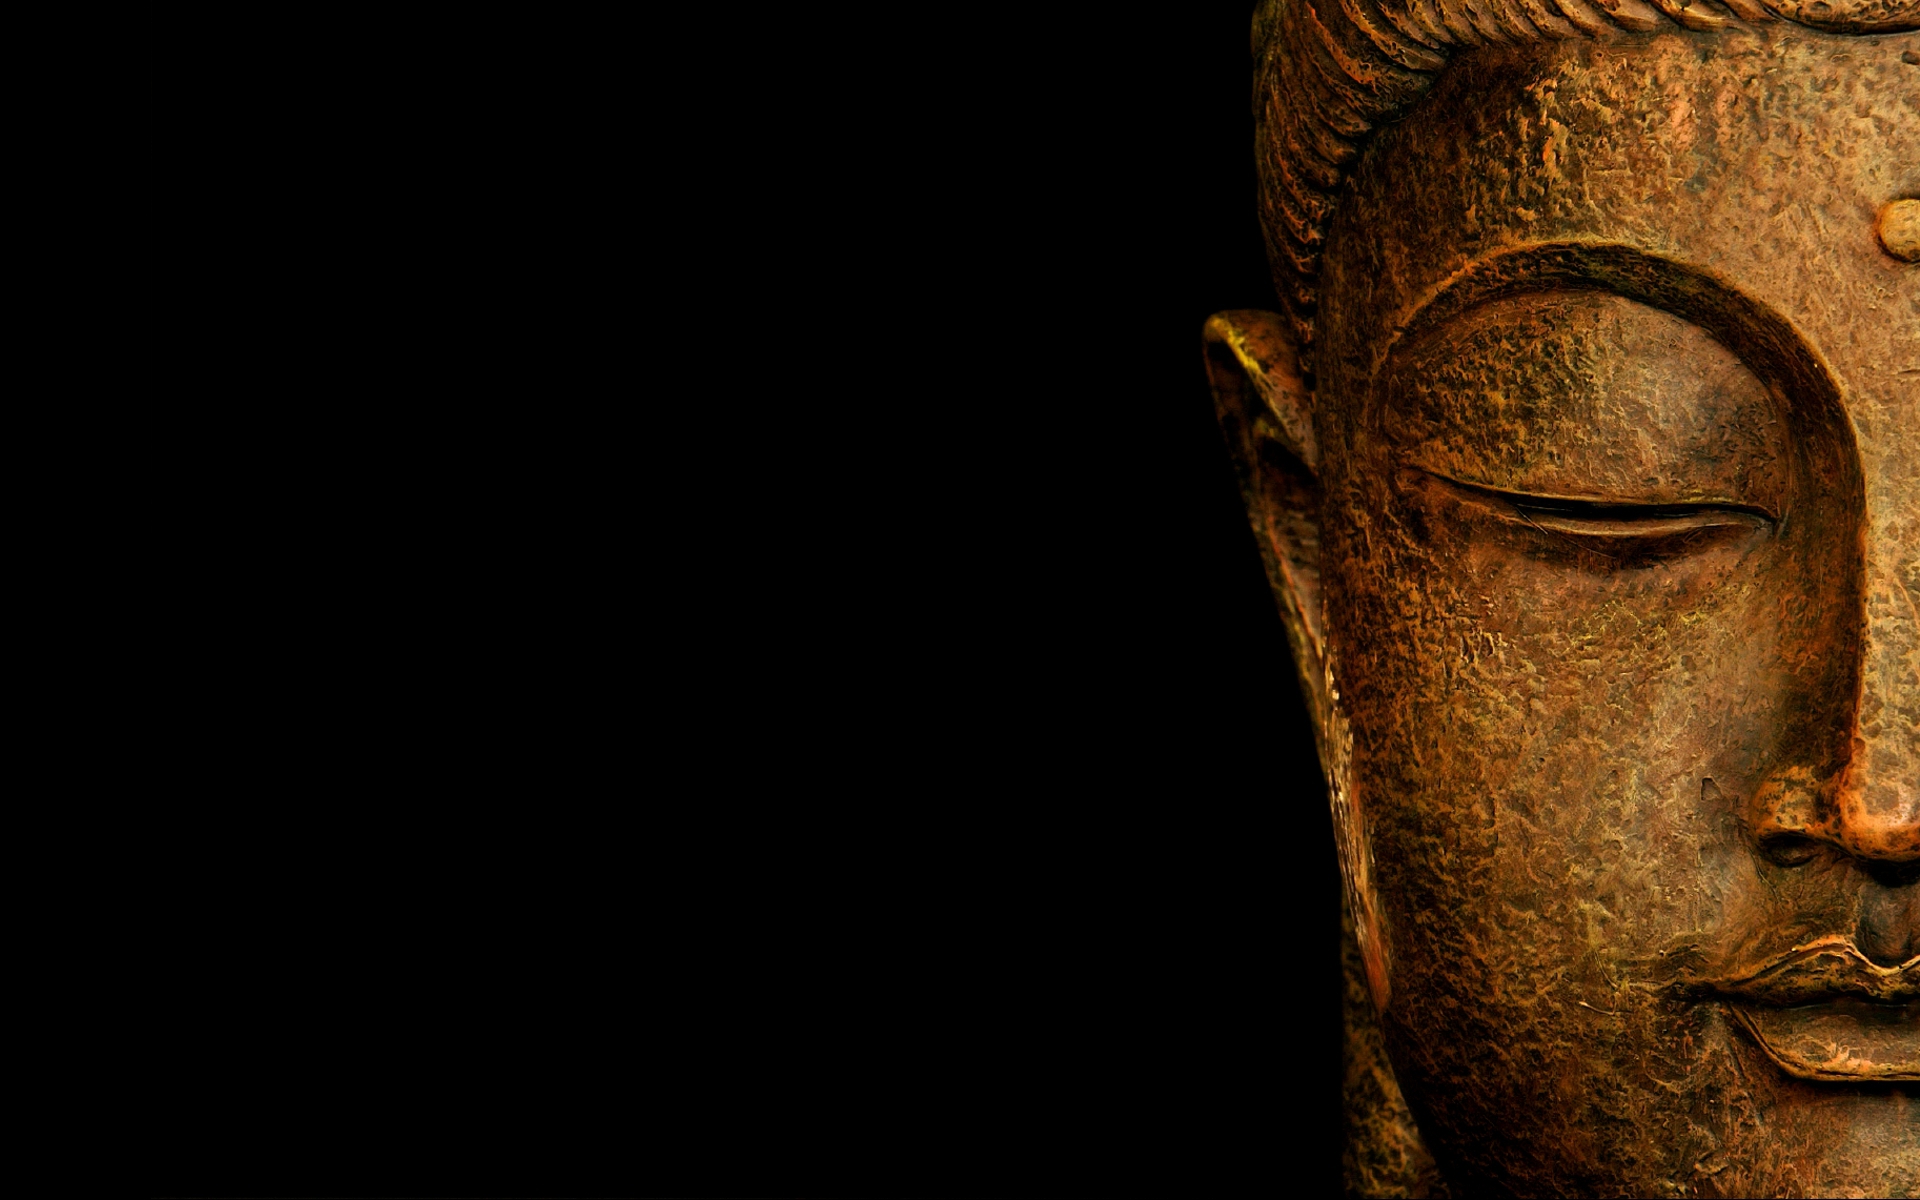  face of Buddha wallpapers and images   wallpapers pictures photos